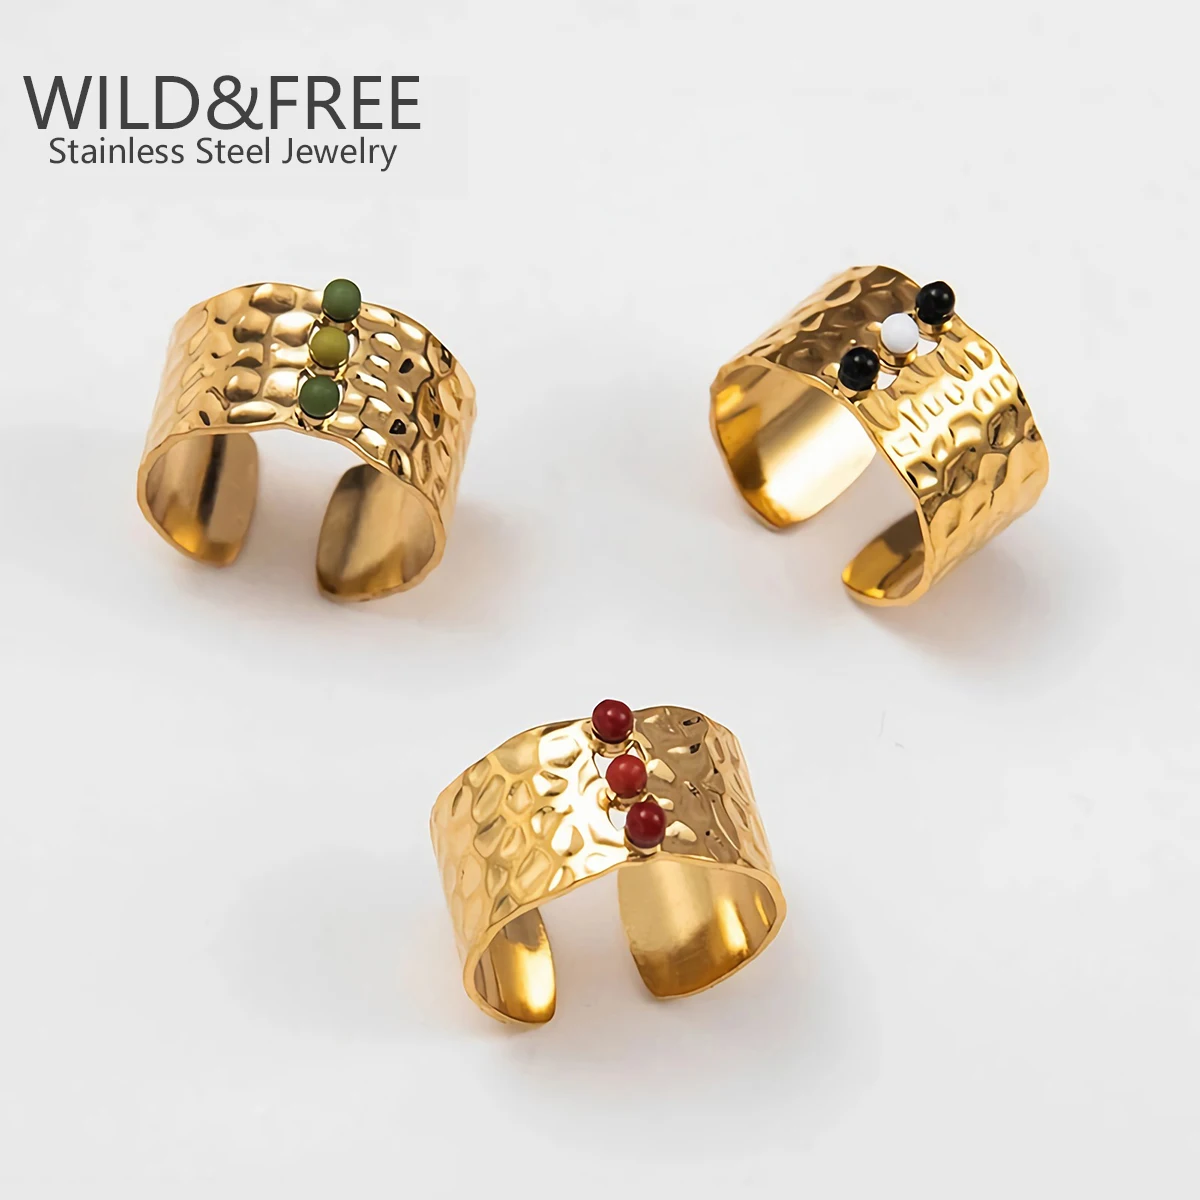 

New Gold Plated Wide Opening Finger Rings Jewelry For Women Stainless Steel Handmade Stone Concave Convex Adjustable Ring